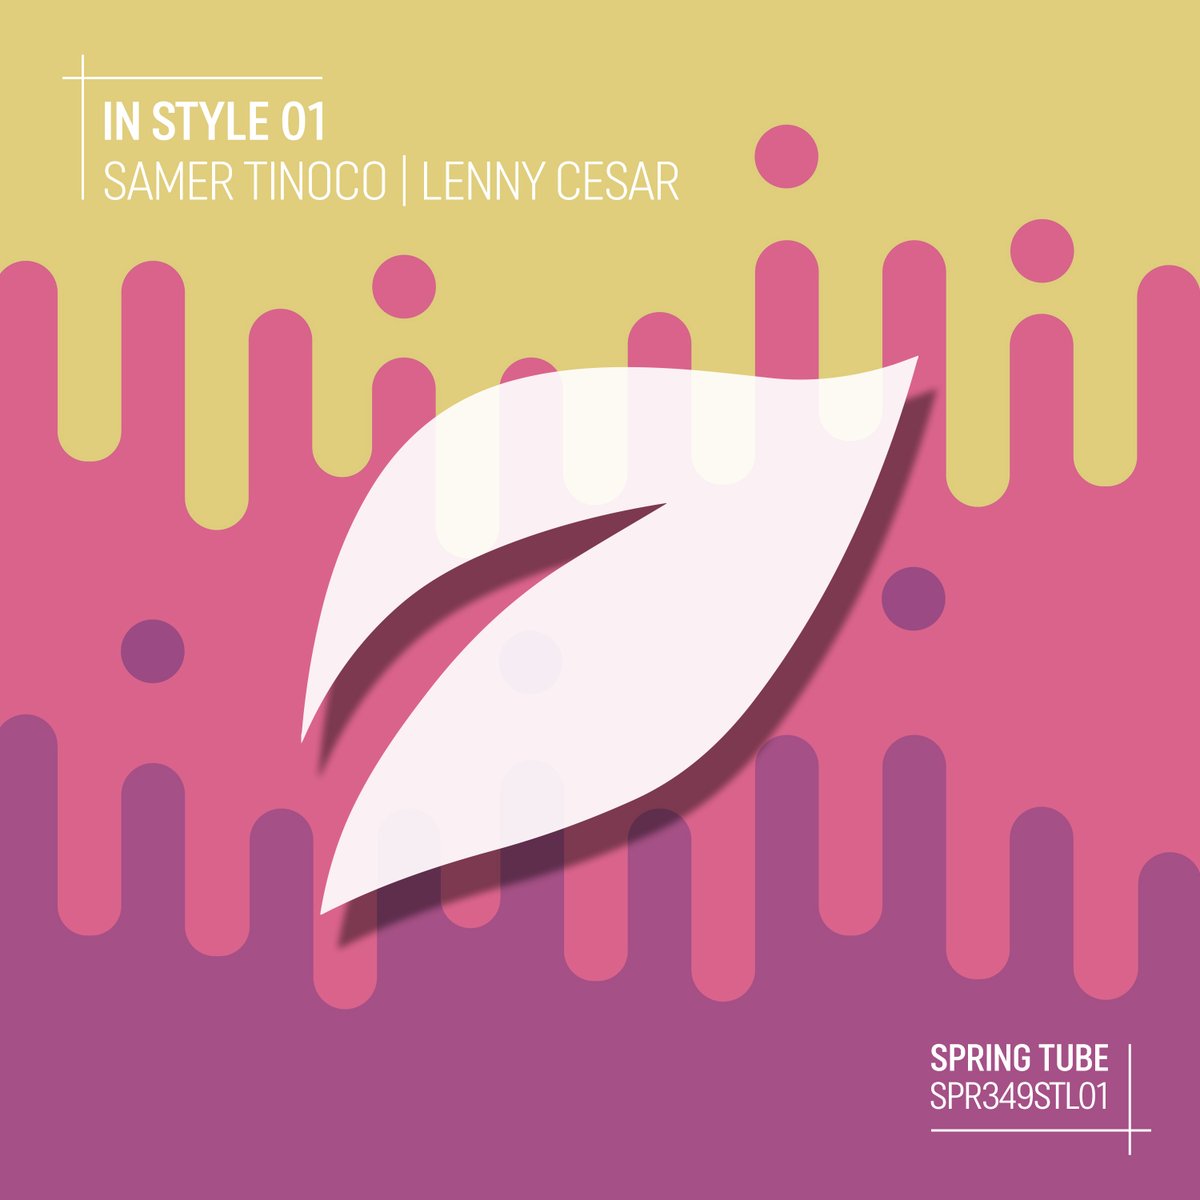 NEW series of releases on Spring Tube

IN STYLE

1st installment includes fresh works by
Samer Tinoco / Lenny Cesar

Perfect melodic deep progressive house stuff
In Style of Spring Tube

OUT TODAY
(main preview/listen/purchase links)
springtube.ampsuite.com/releases/links…

#deepprogressivehouse